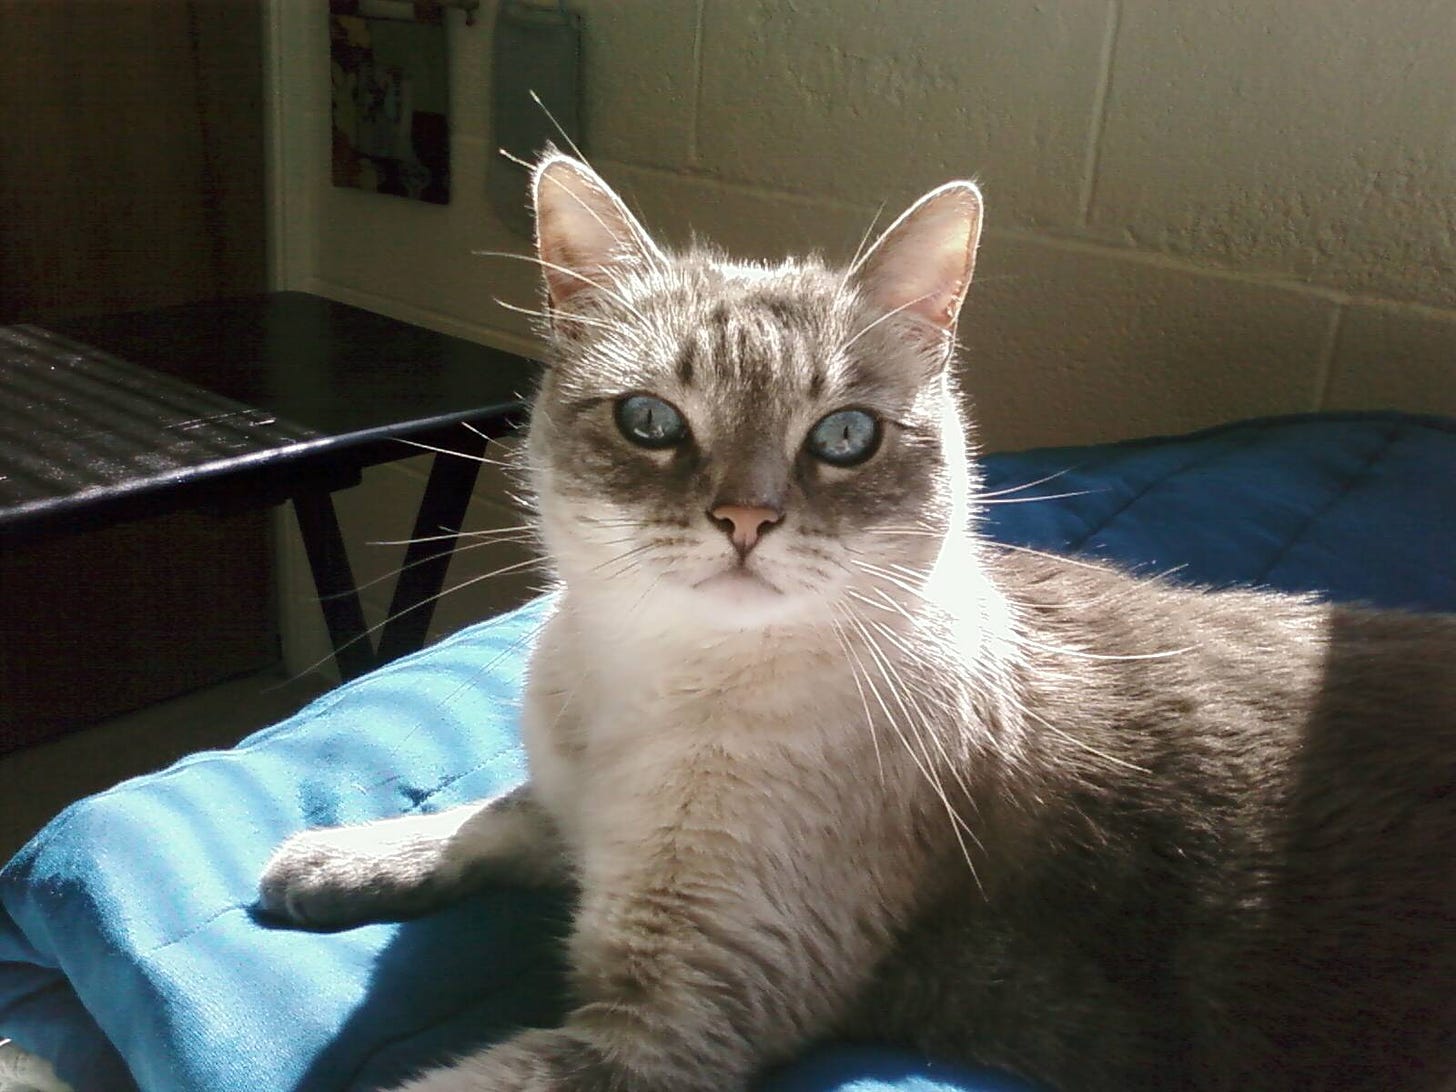 Siamese mix cat with blue eyes on a blanket on a bed, brick wall in background